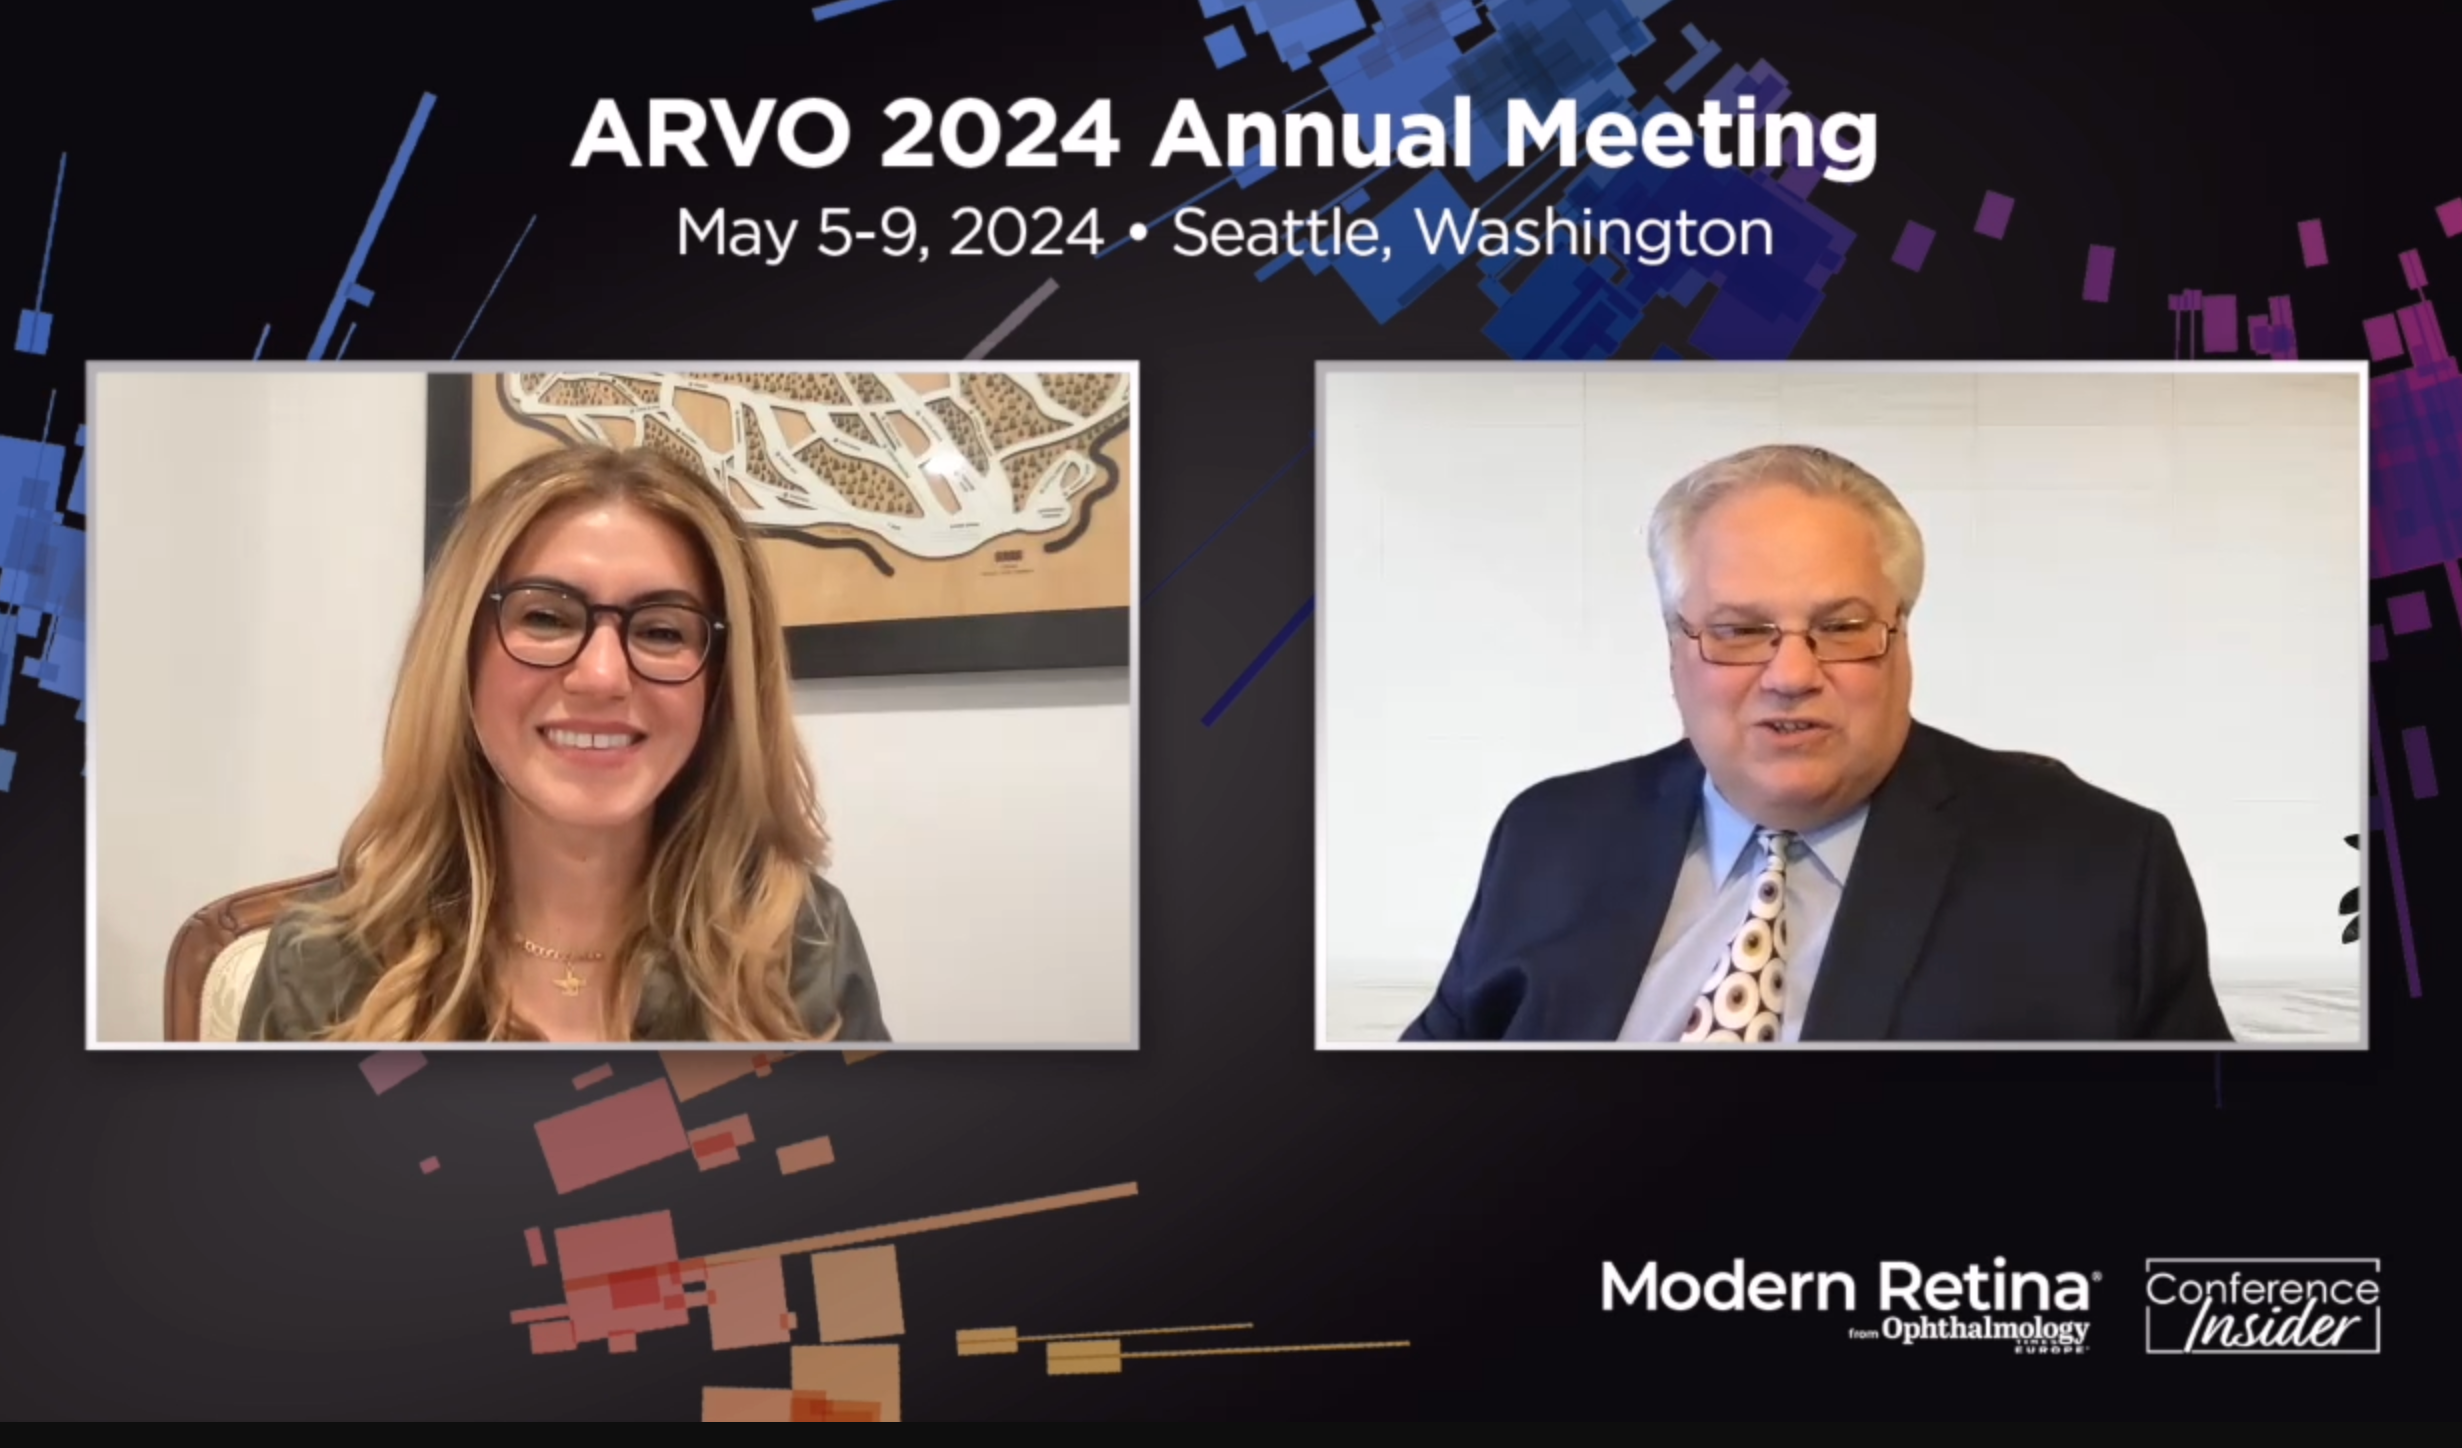 Neda Gioia, OD, sat down to discuss a poster from this year's ARVO meeting held in Seattle, Washington